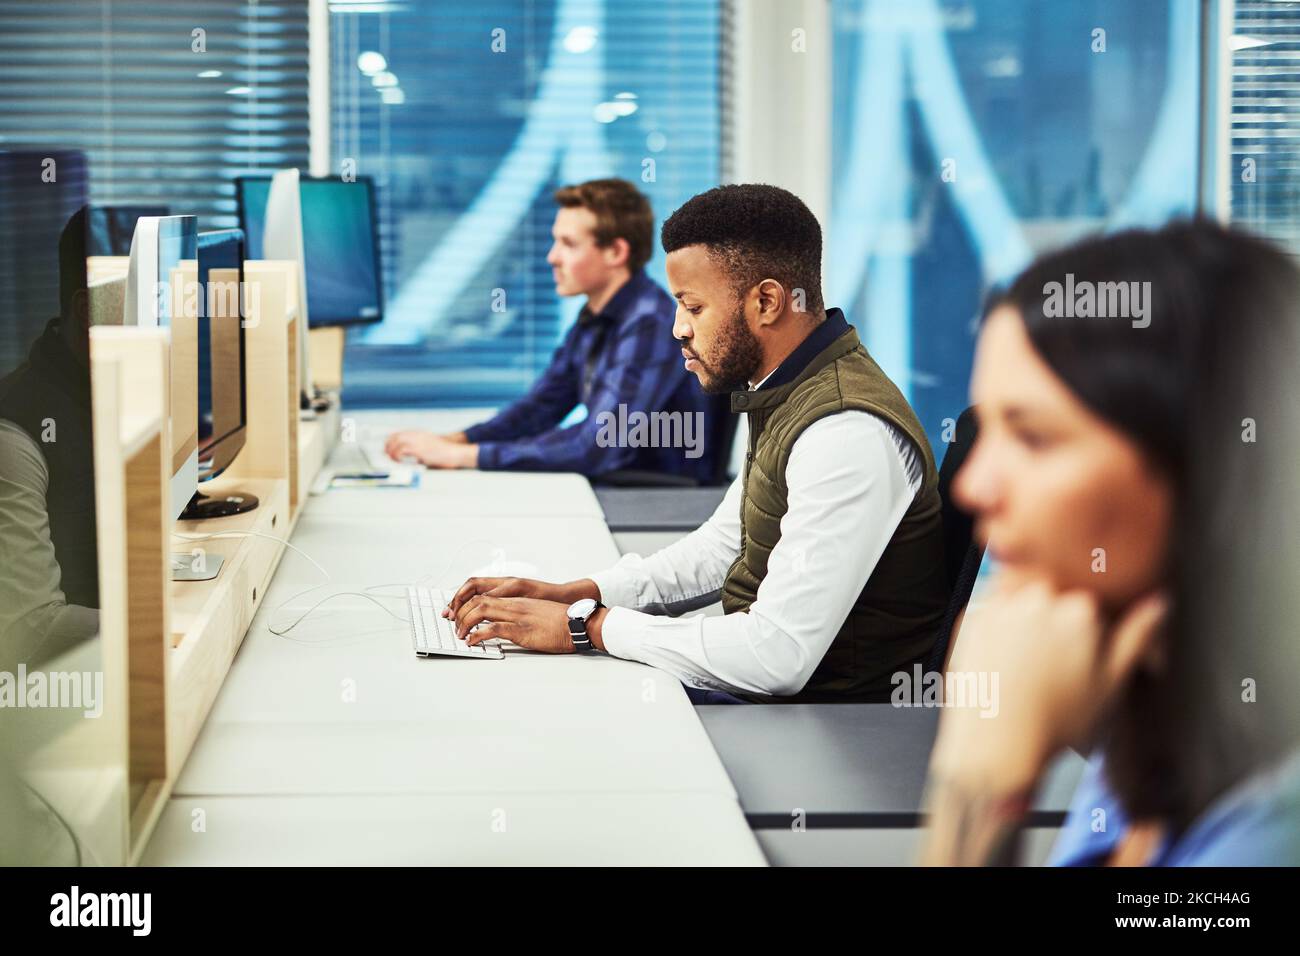 Hes a busy worker. a group of designers working on computers in an office. Stock Photo